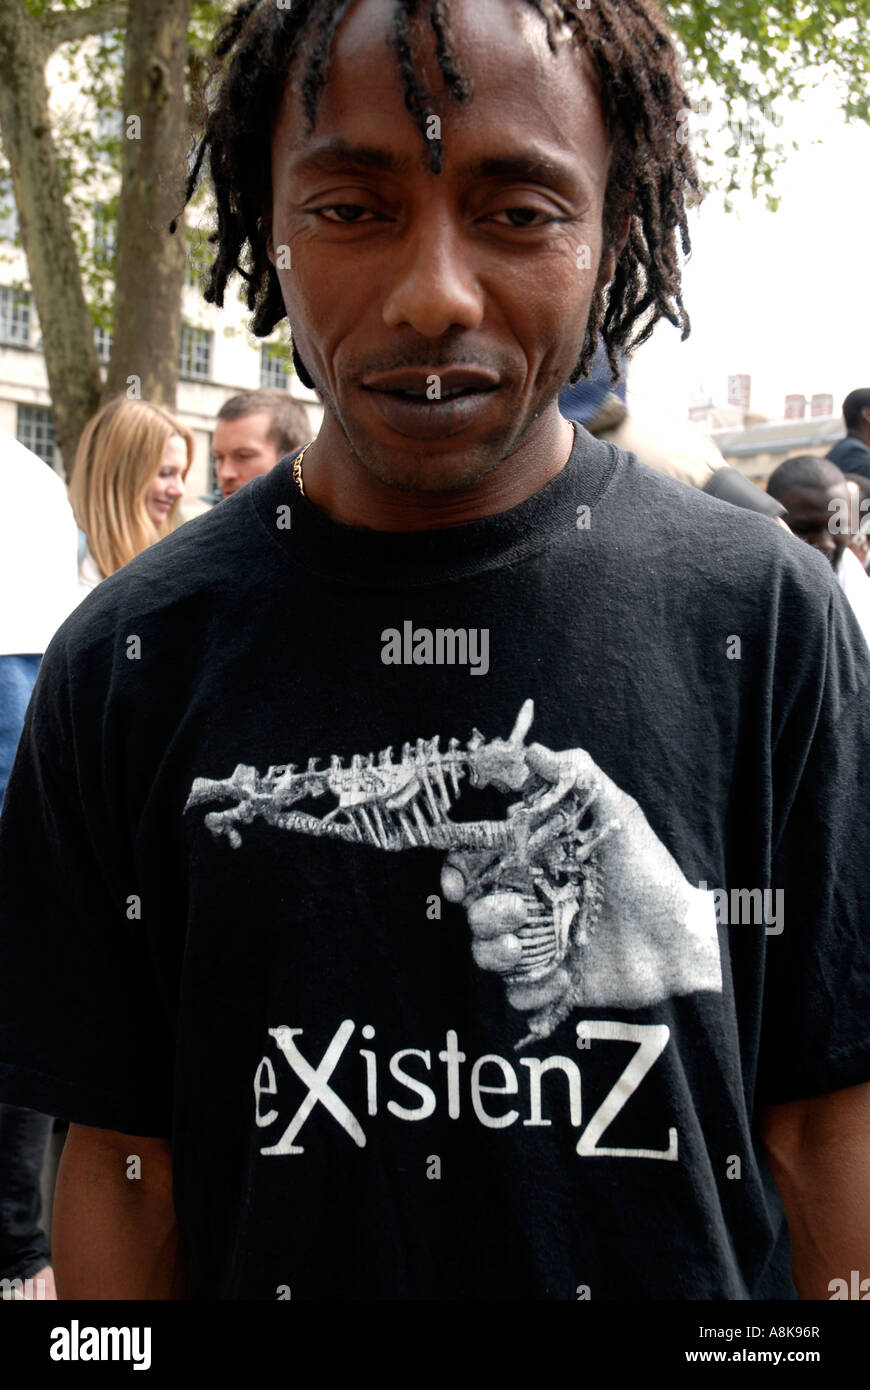 Young man at Dafur protest with tee-shirt  with gun made of skeleton Stock Photo